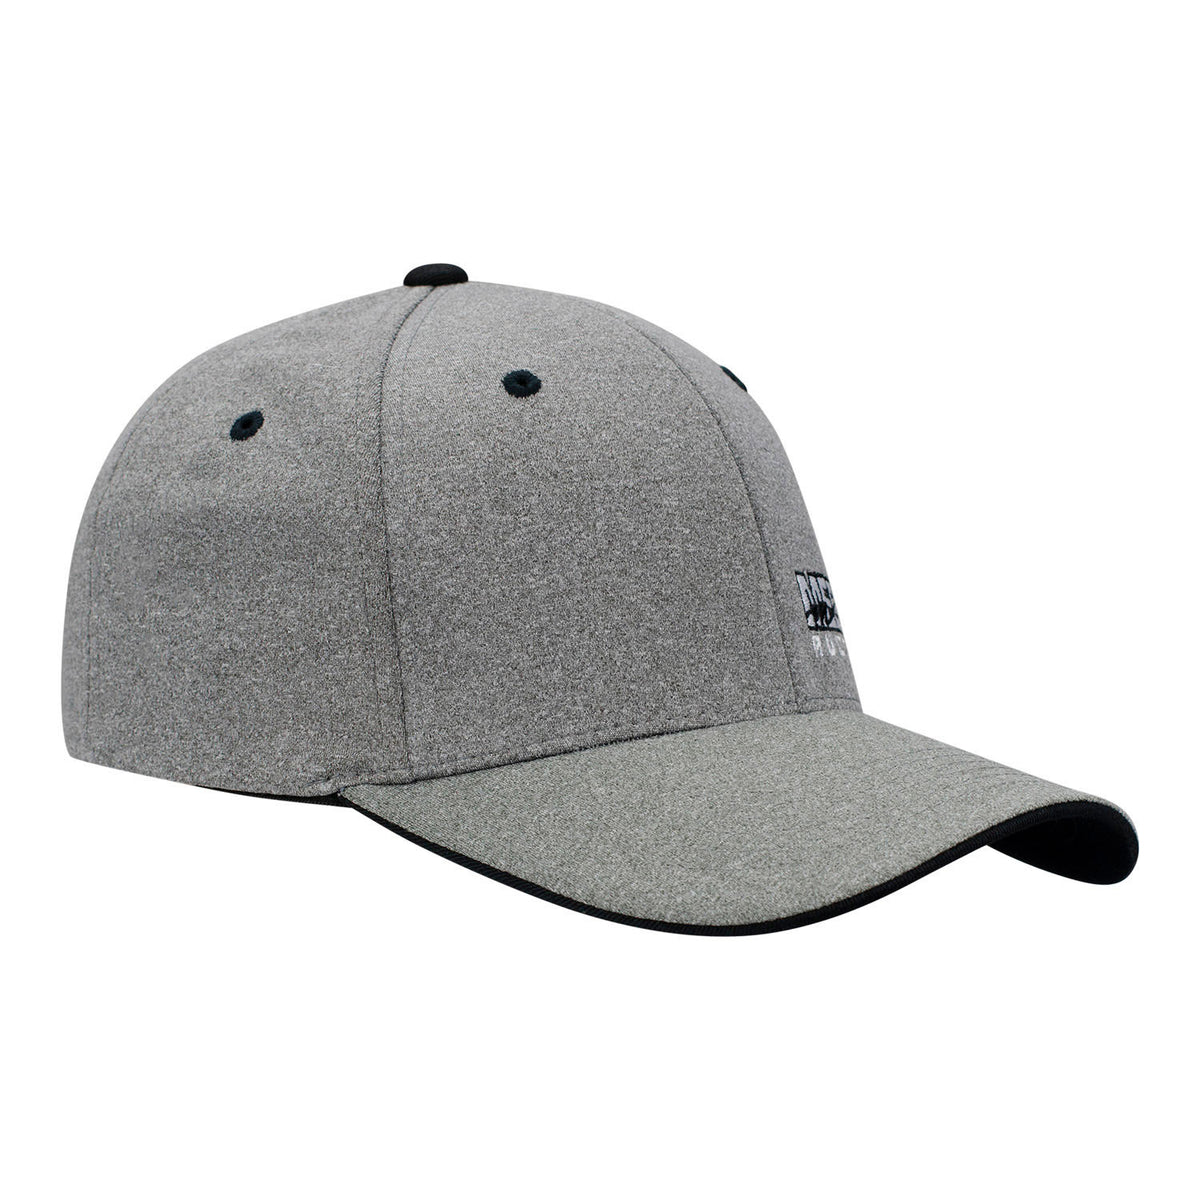 Primary Logo Heather Grey Flex - Front Right Side View